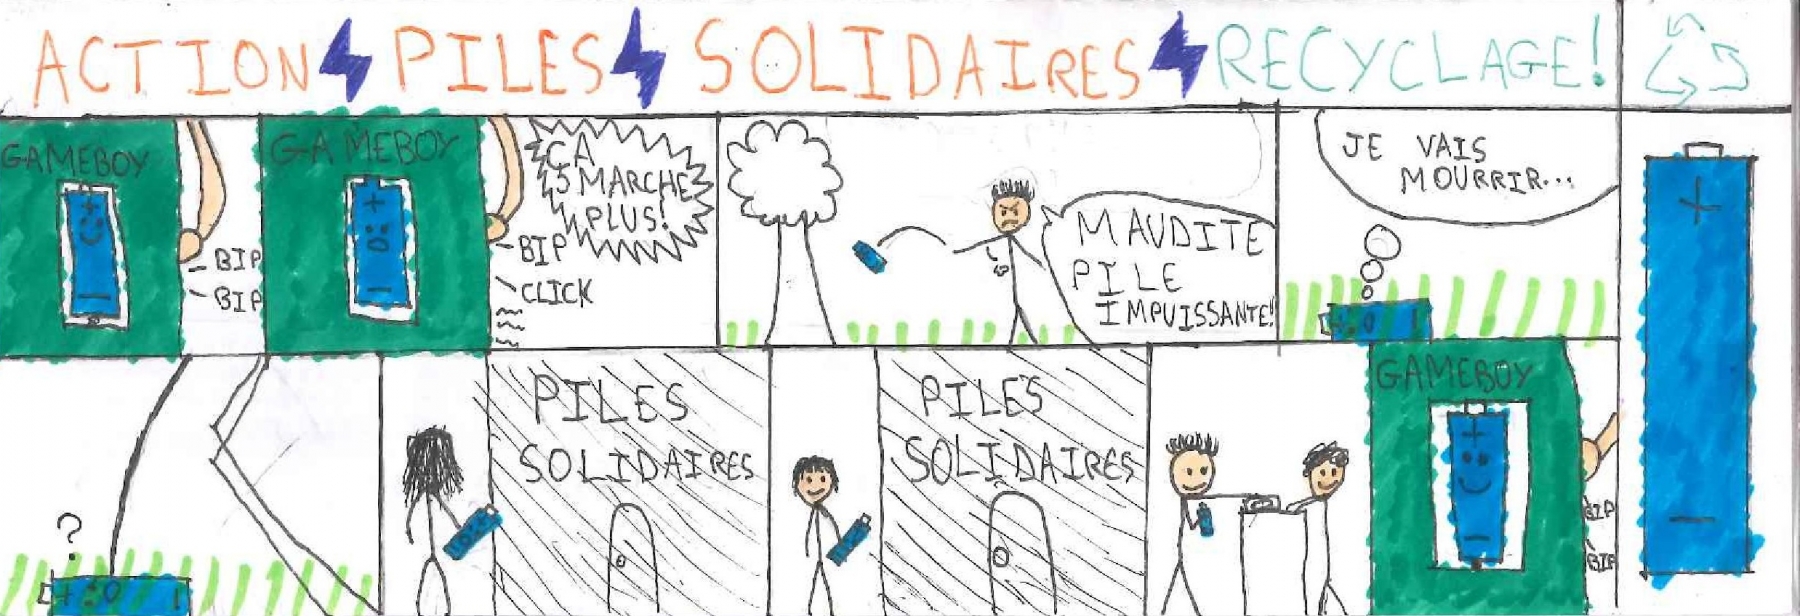 piles solidaires - marque page - Alexandre